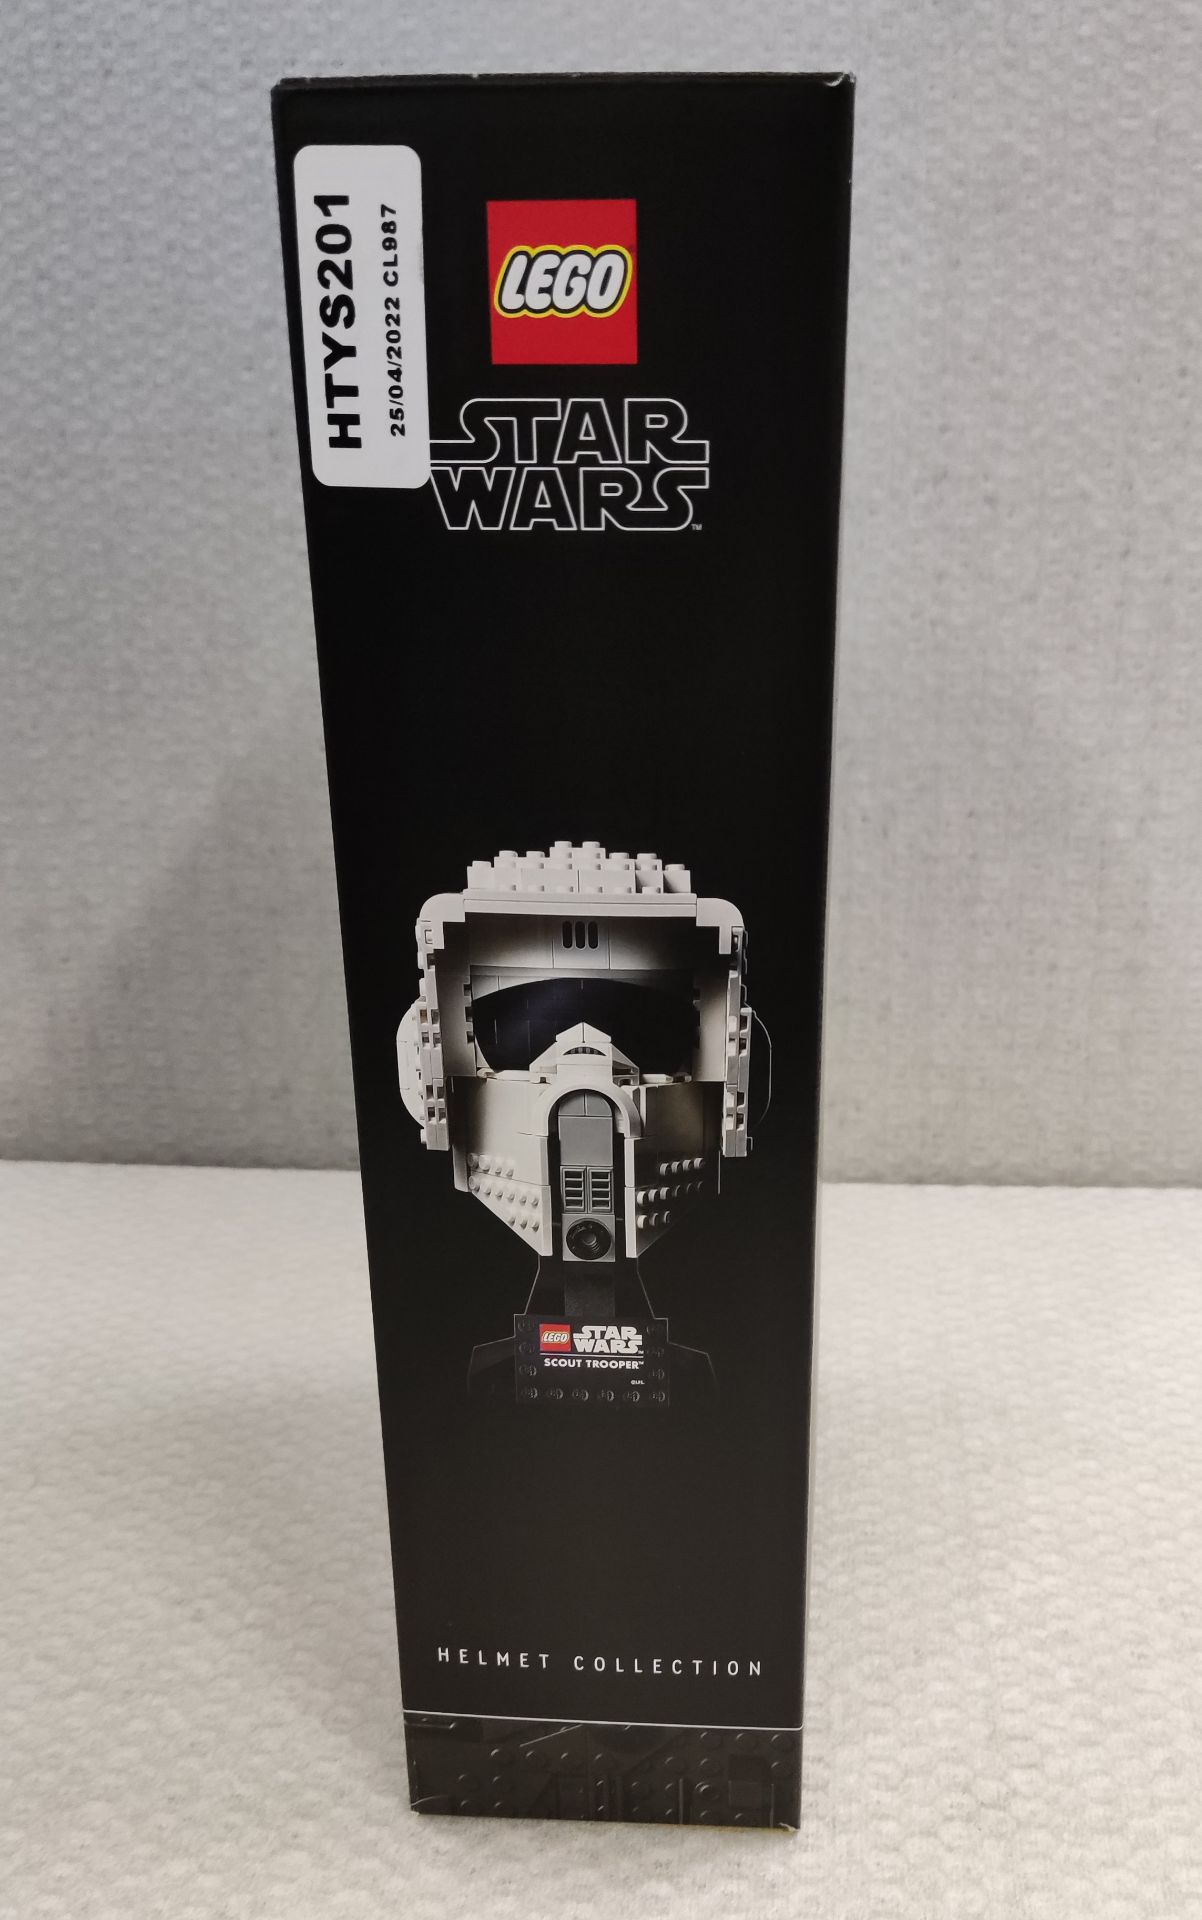 1 x Lego Star Wars Scout Trooper Helmet - Model 75305 - New/Boxed - Image 5 of 7